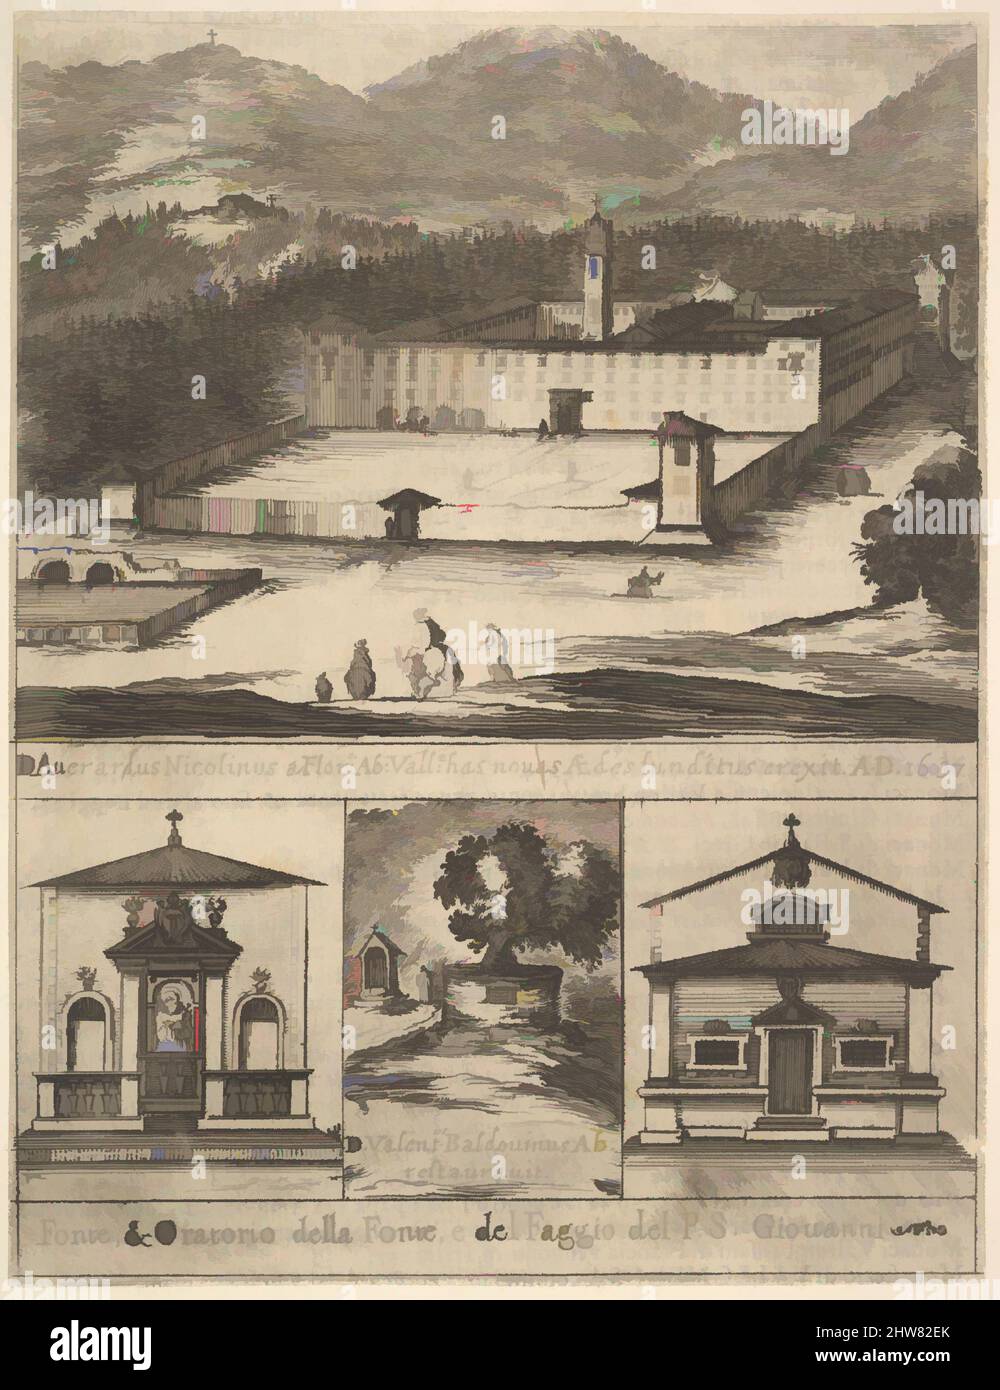 Art inspired by Four views: at top, a view of the new monastery of Vallombrosa, at bottom left and right, a view of a chapel, at bottom center, the tree of St. John Gualbert, from 'Frontispiece and four scenes from the life of Saint John Gualbert' (Frontispice et quatre vignettes pour, Classic works modernized by Artotop with a splash of modernity. Shapes, color and value, eye-catching visual impact on art. Emotions through freedom of artworks in a contemporary way. A timeless message pursuing a wildly creative new direction. Artists turning to the digital medium and creating the Artotop NFT Stock Photo